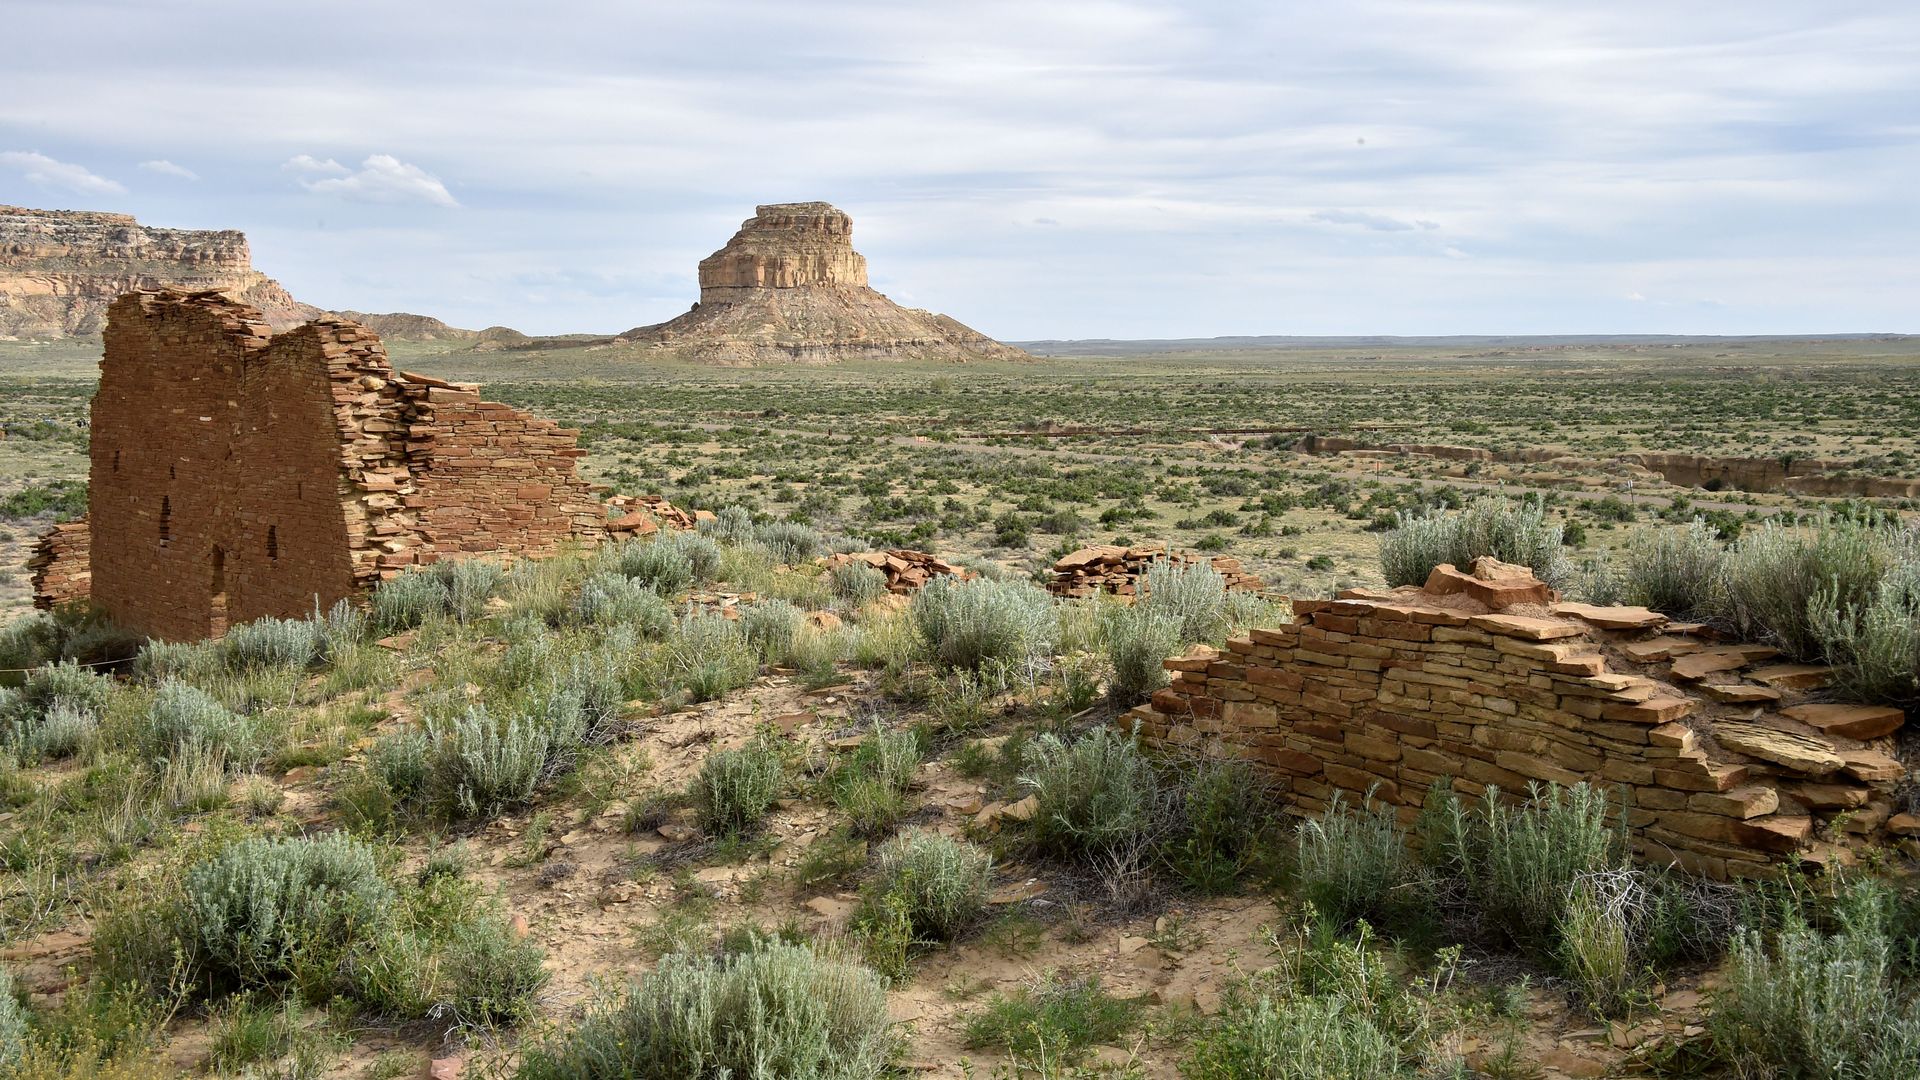 The ruins of a great house built by Ancestral Puebloans in Chaco Culture National Historical Park